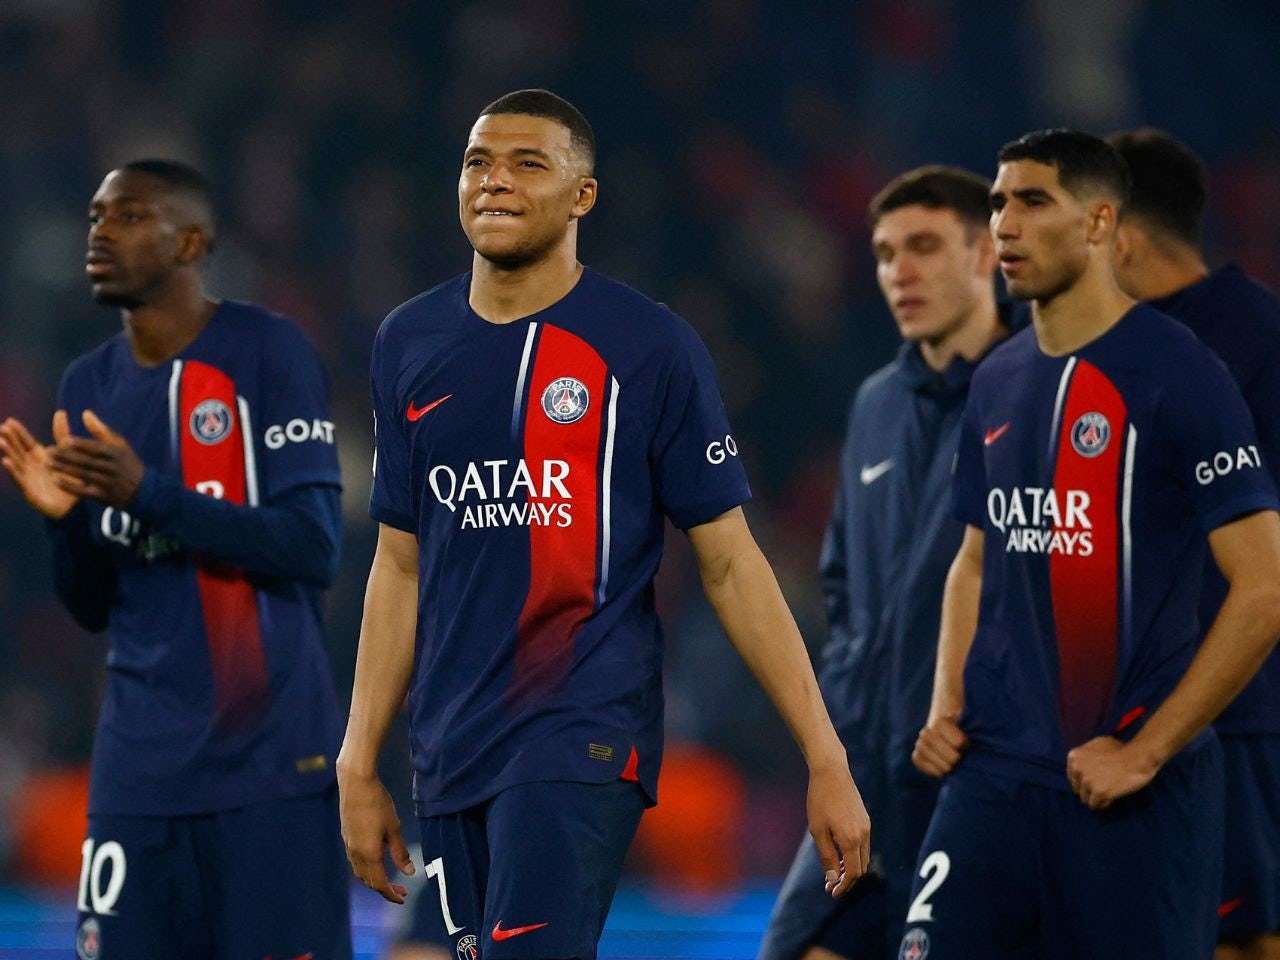 Kylian Mbappe rolls eyes at Real Madrid question after PSG elimination